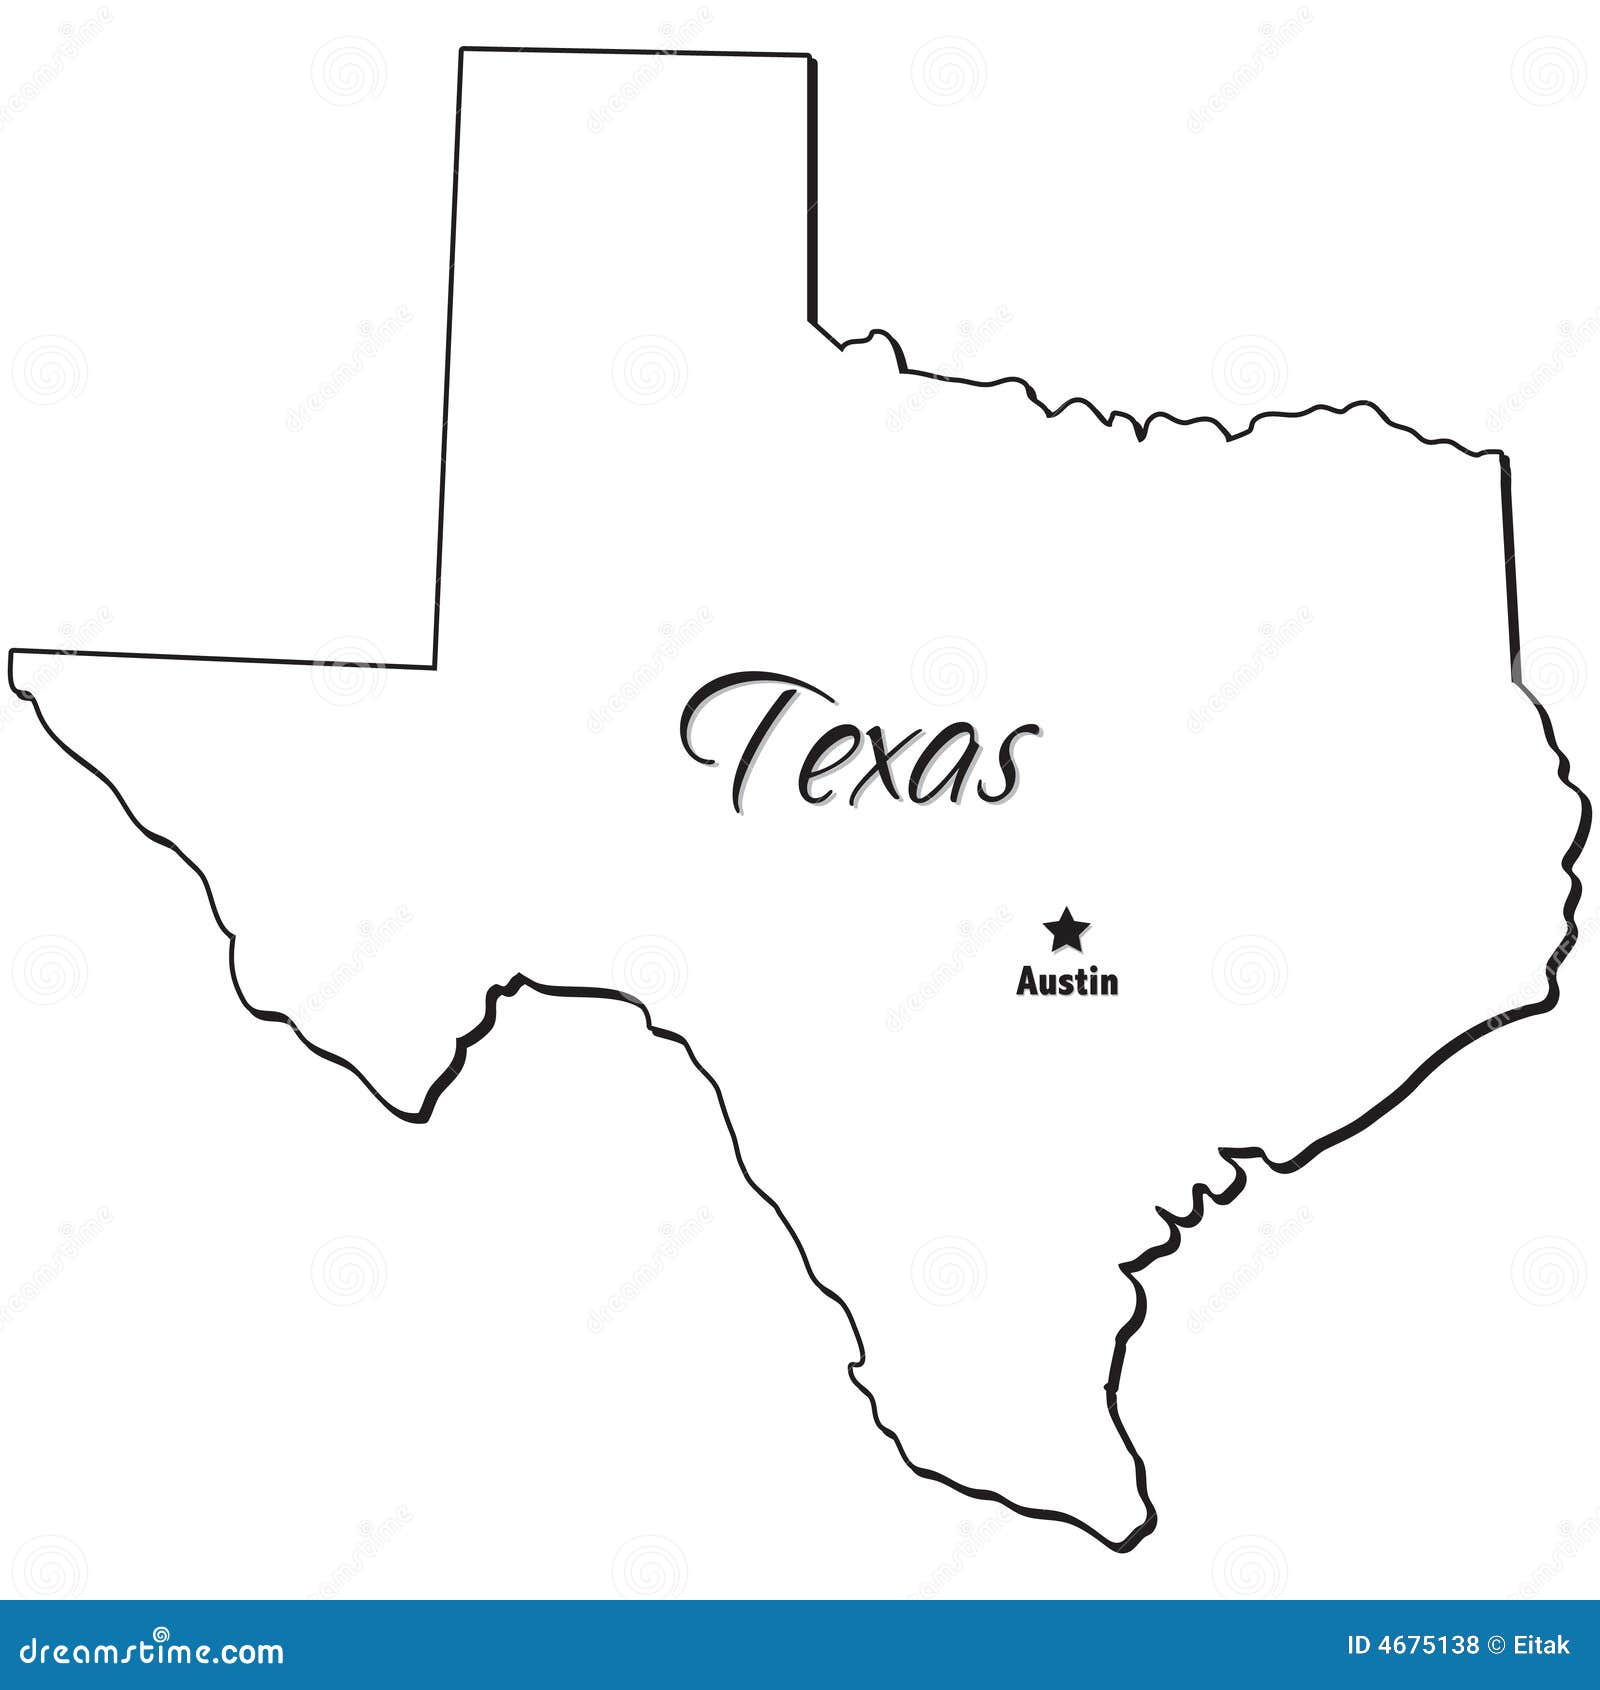 state of texas outline